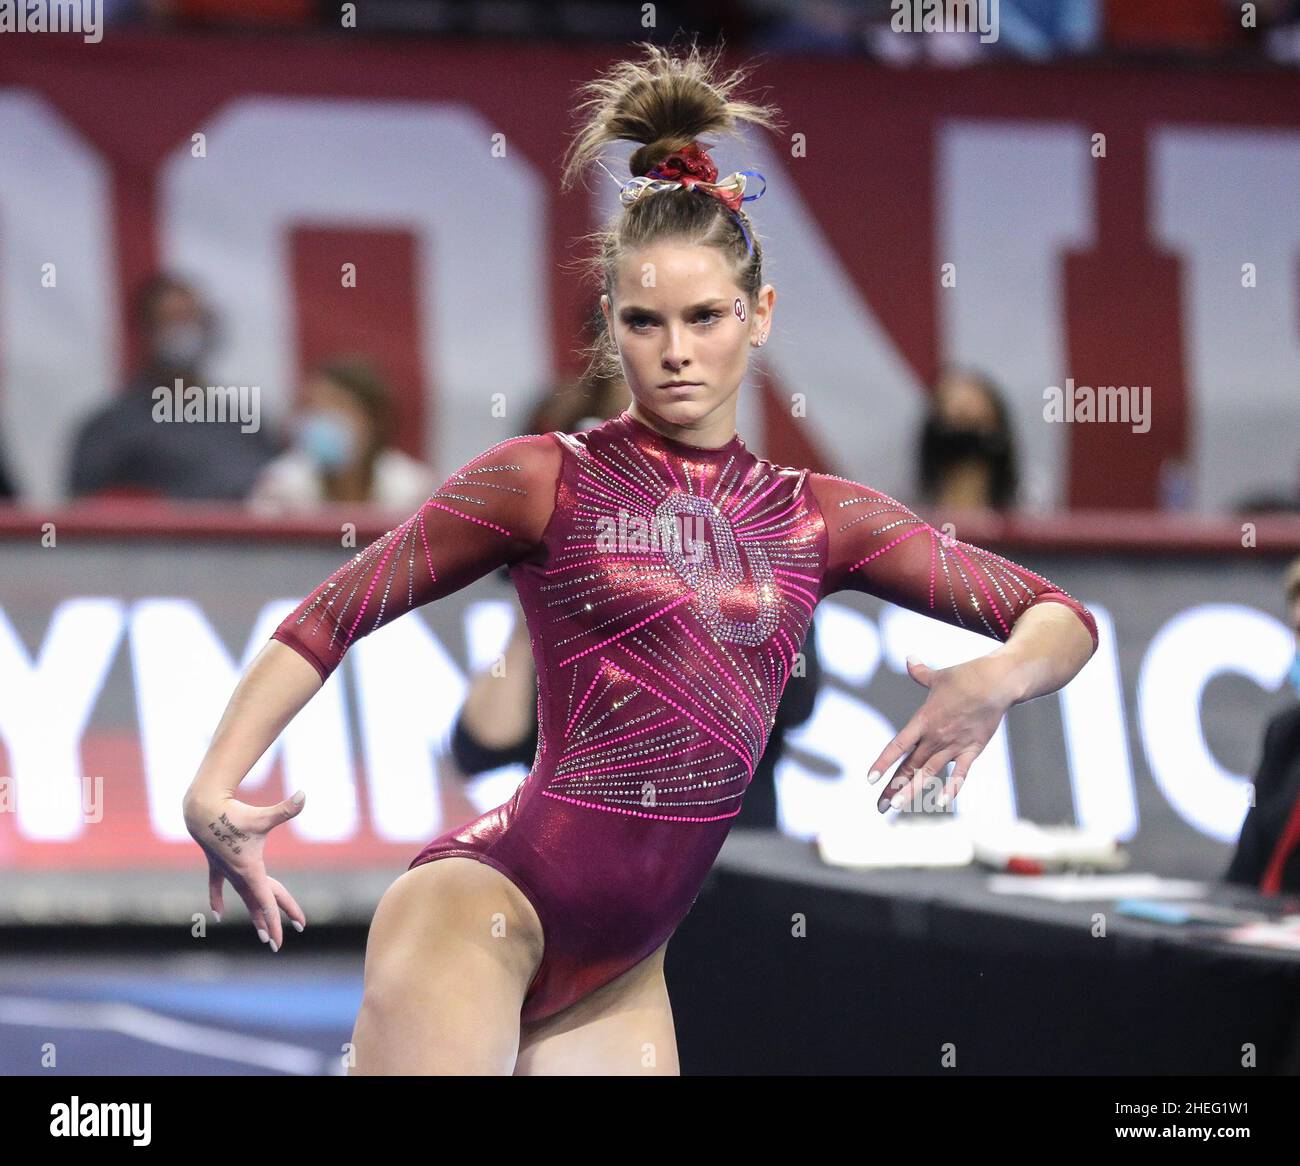 Norman, OK, USA. 9th Jan, 2022. Oklahoma's Jordan Bowers poses during her  floor routine at the NCAA gymnastics meet between the Alabama Crimson Tide  and the Oklahoma Sooners at the Lloyd Noble